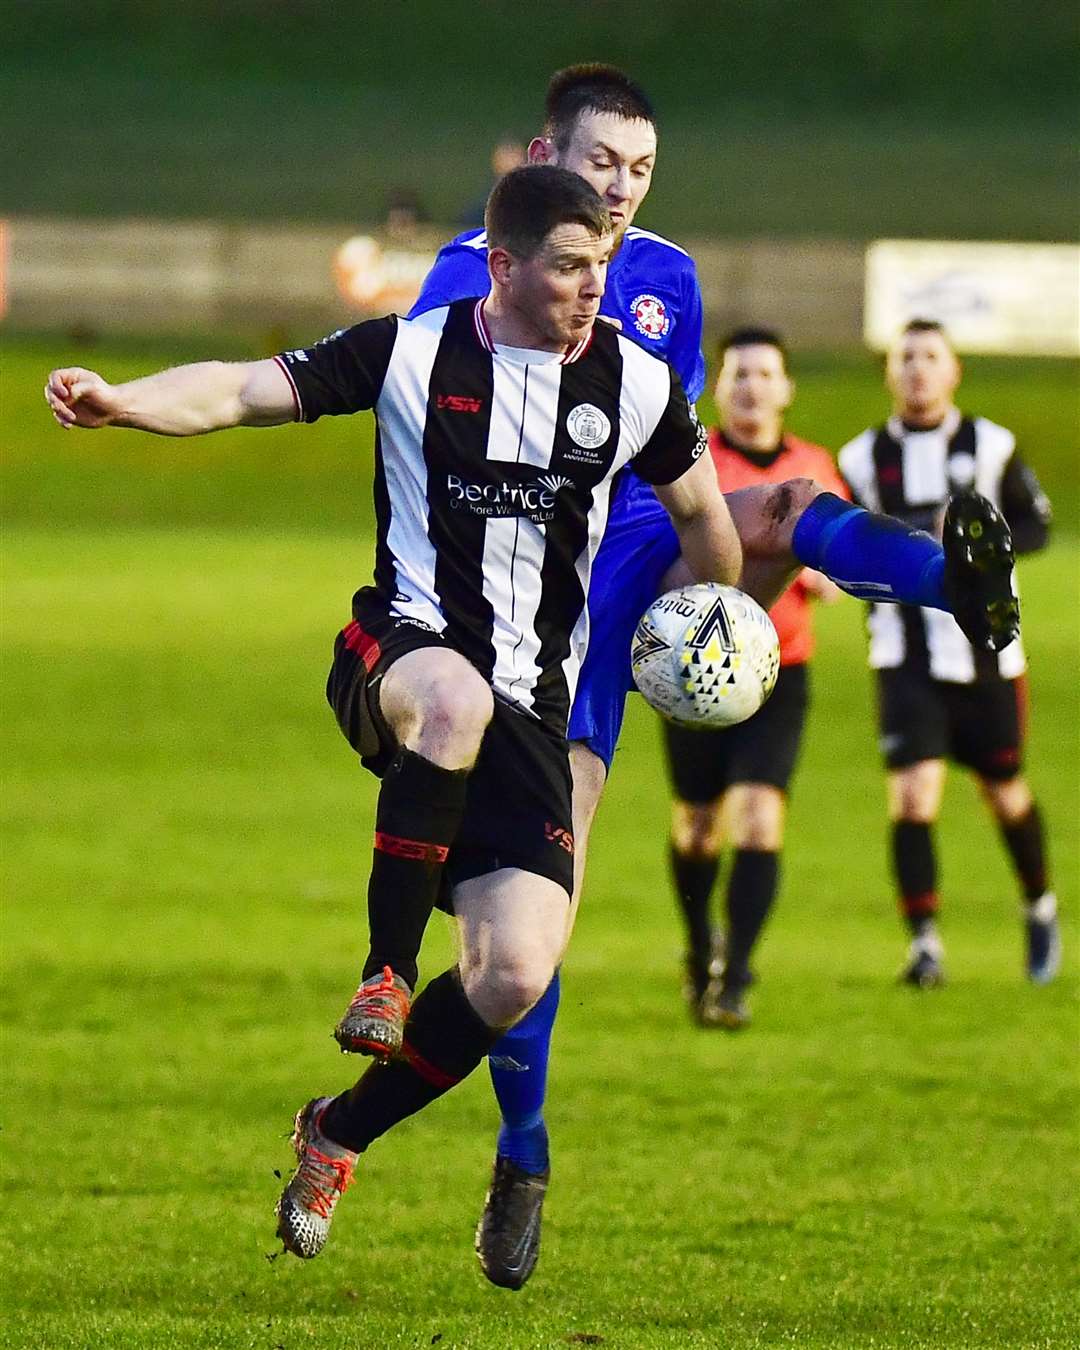 Wick's Davie Allan receives the ball as Lossiemouth's Dean Stewart closes in. Monday's game was the first at Harmsworth Park since new protocols came into effect. Picture: Mel Roger